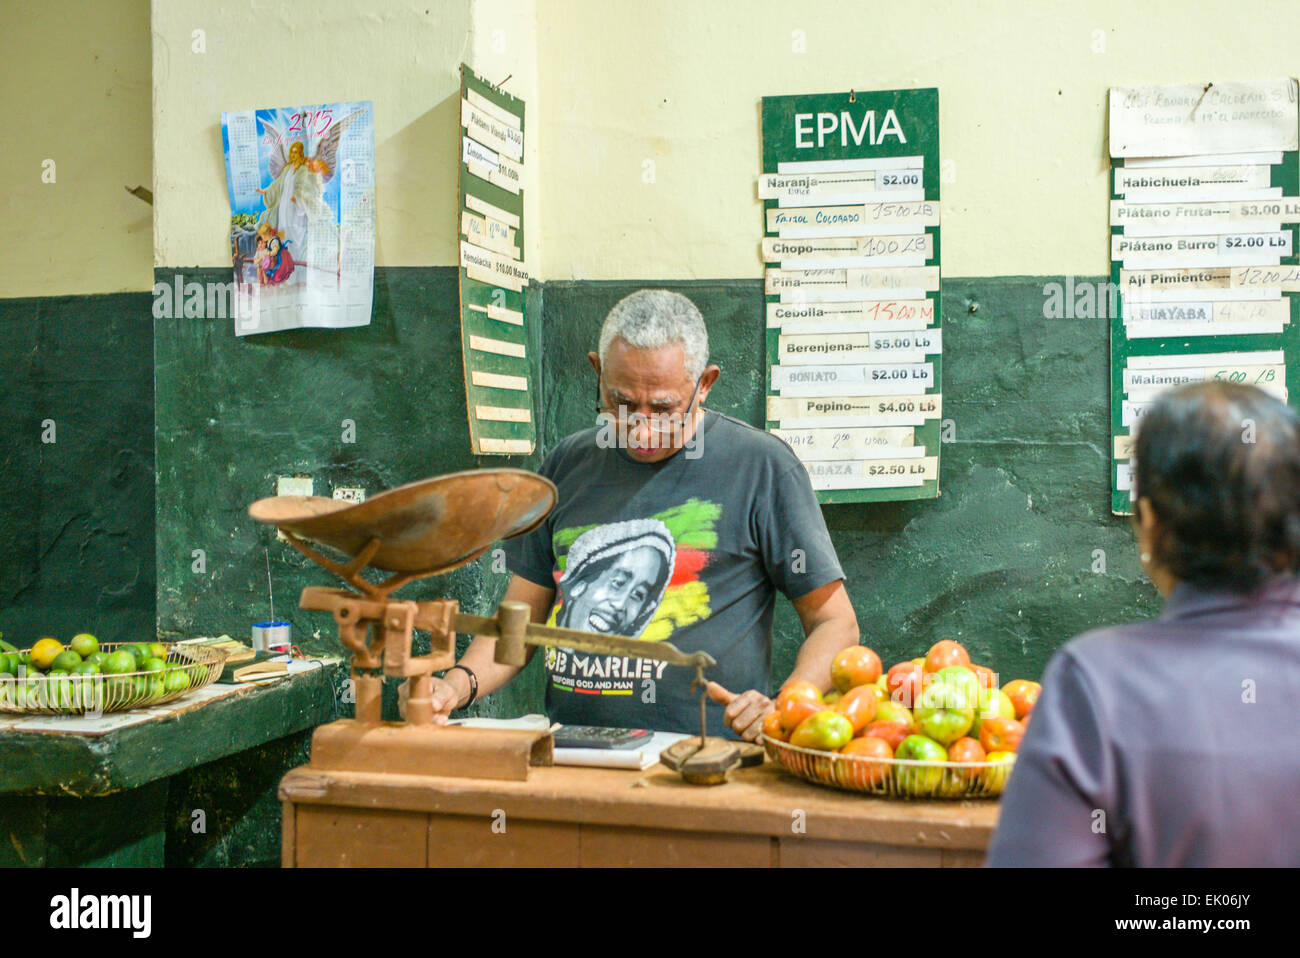 Government worker wearing a Bob Marly t-shirt weighs and prices fruit in CUP Cuban pesos for local buyers. Stock Photo